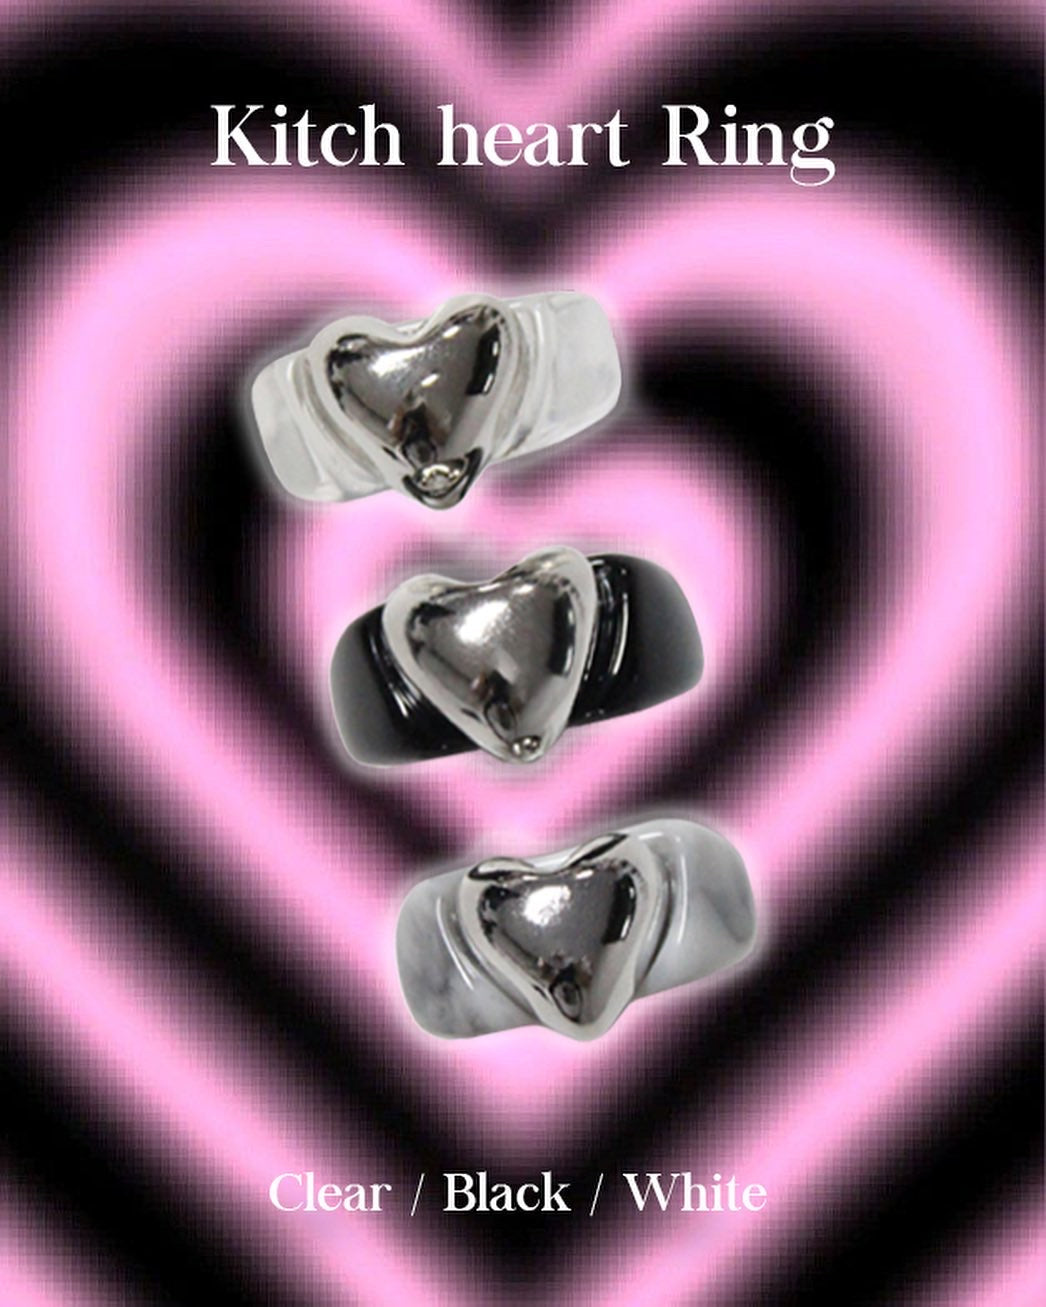 Kitch heart ring